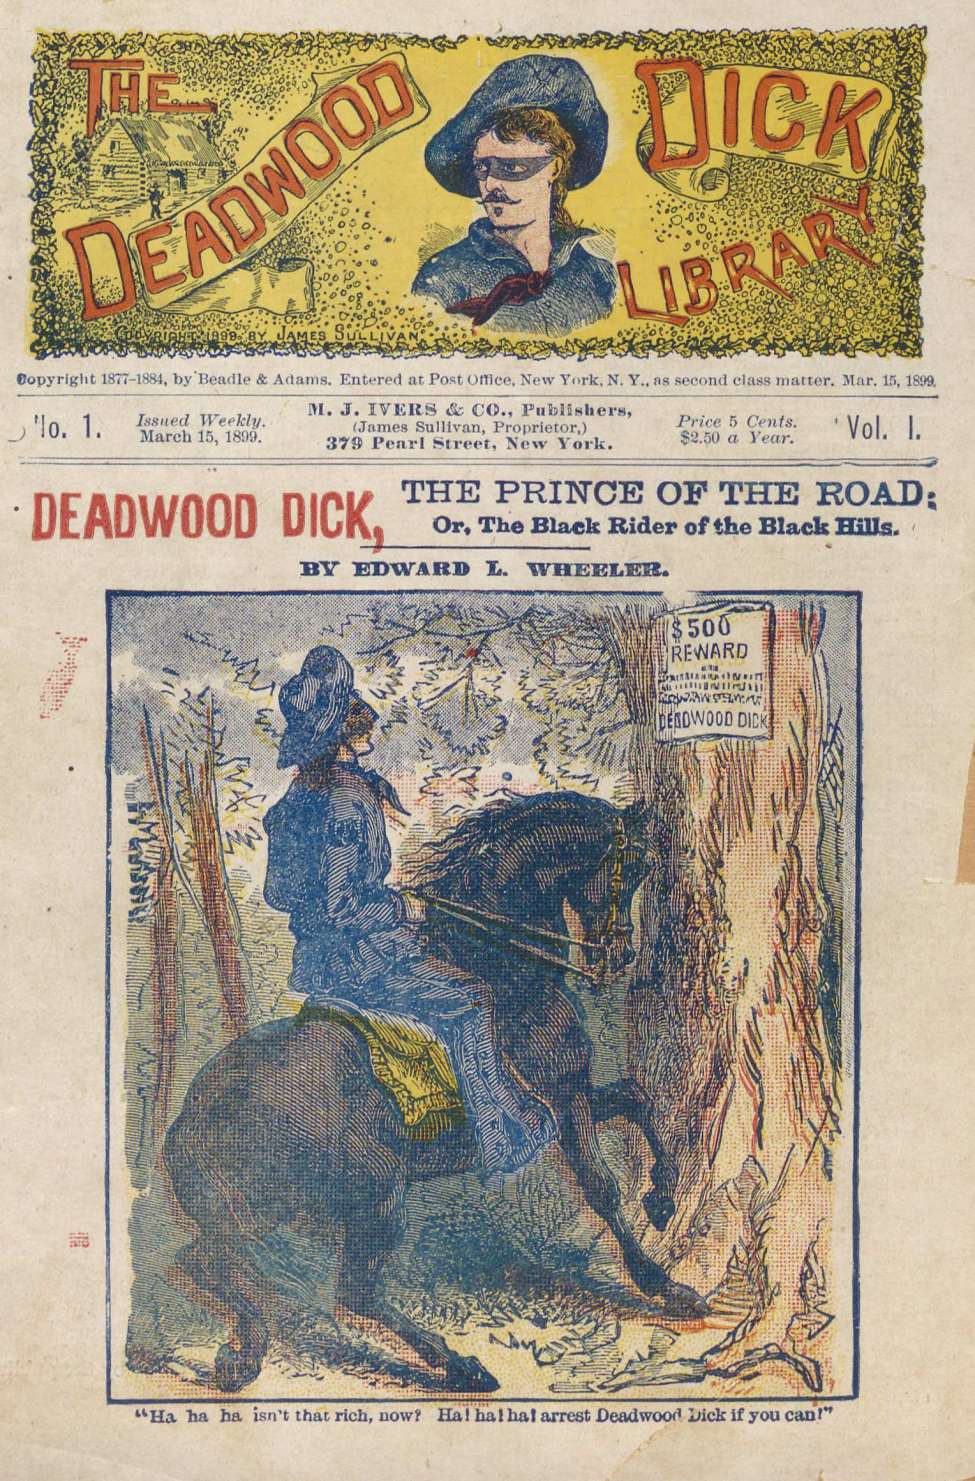 Book Cover For Deadwood Dick Library v1 1 - Deadwood Dick, The Prince of the Road